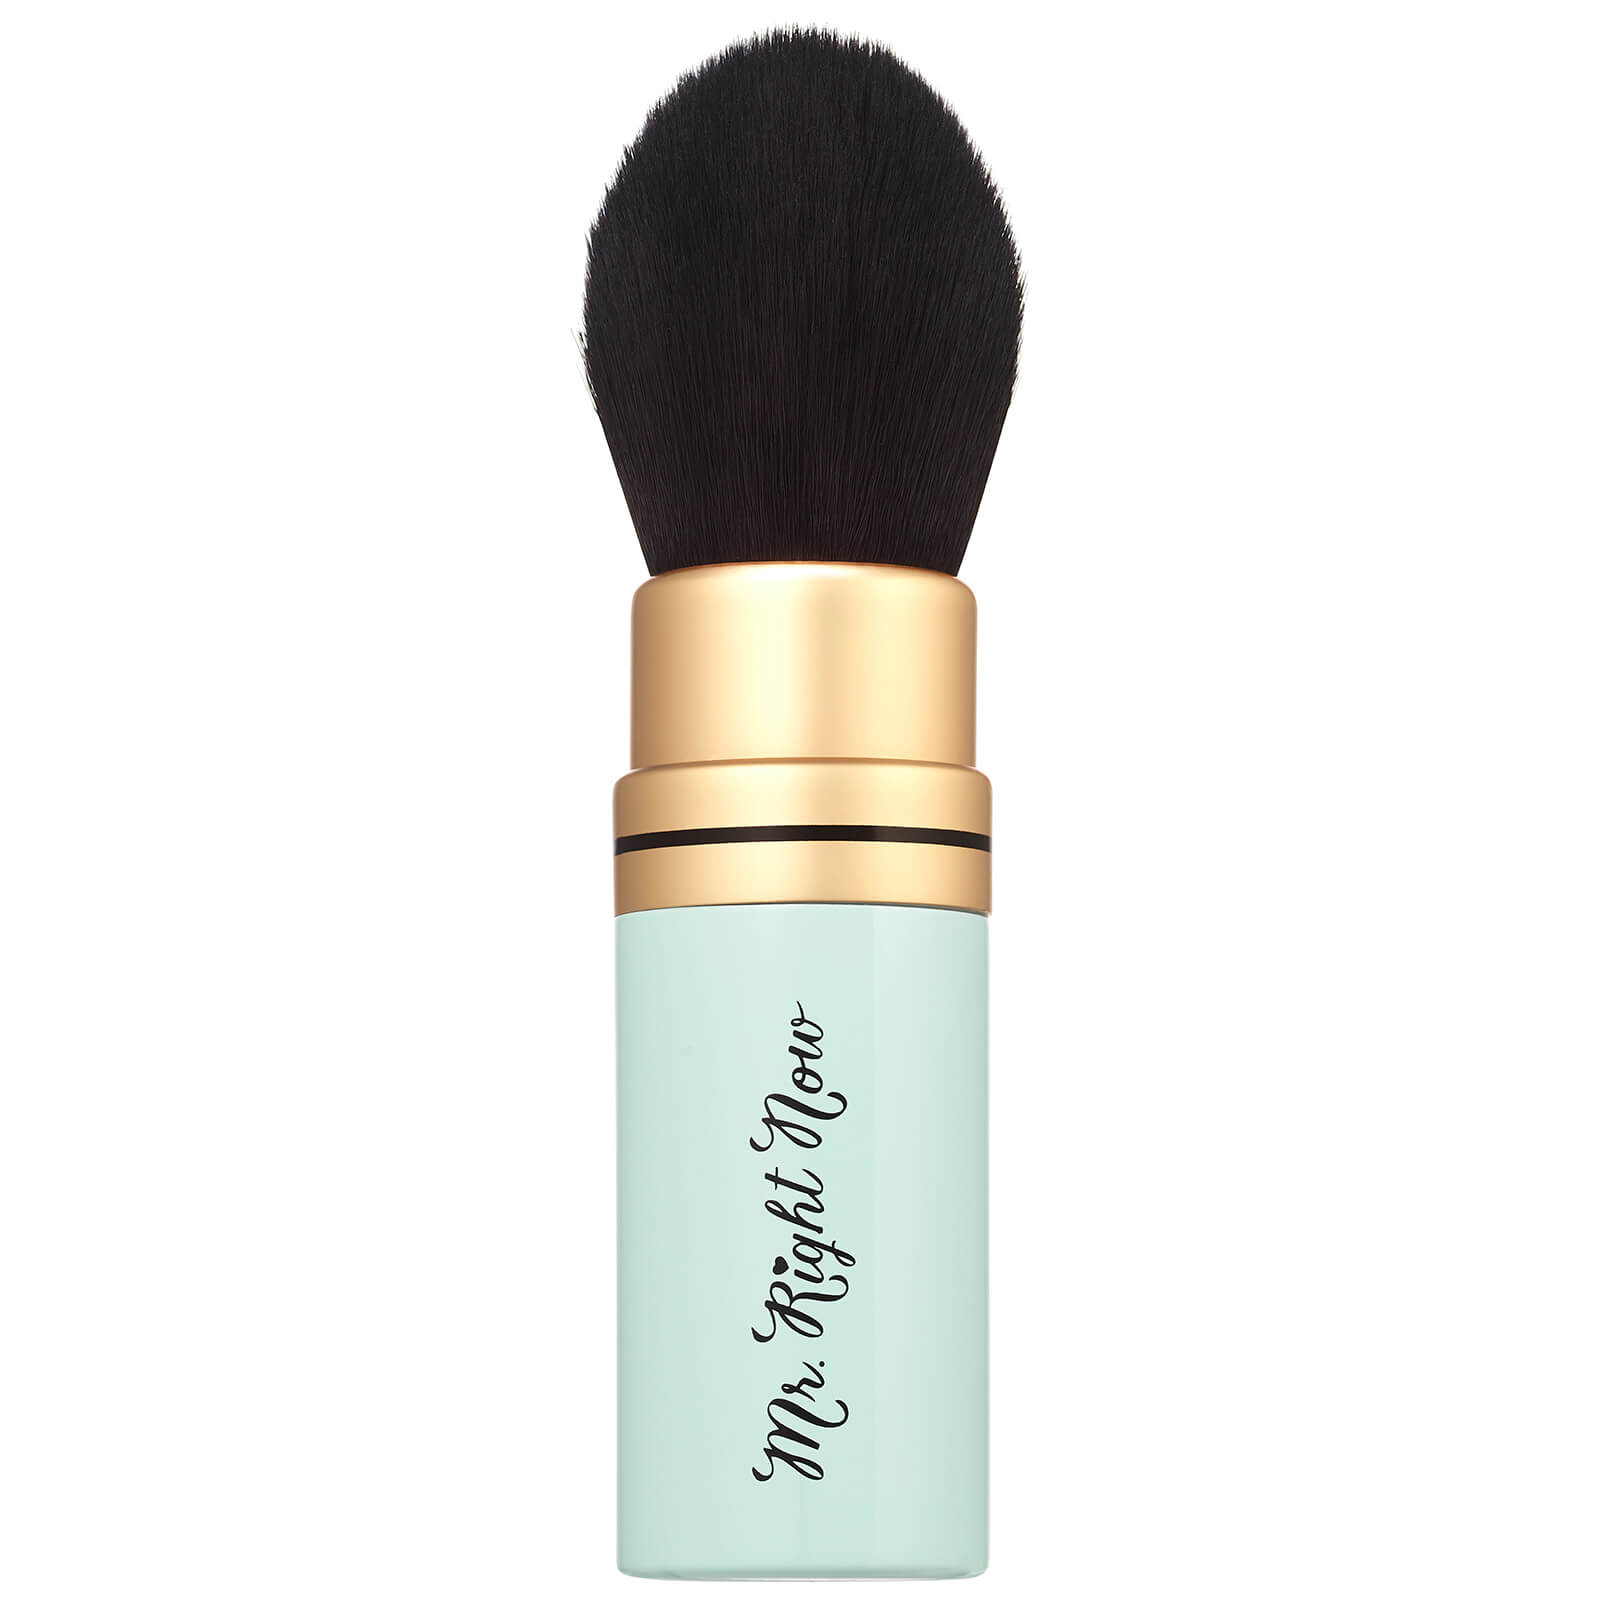 Too Faced Women's Too Faced 'Mr Right Now' Perfectly Portable Powder Brush